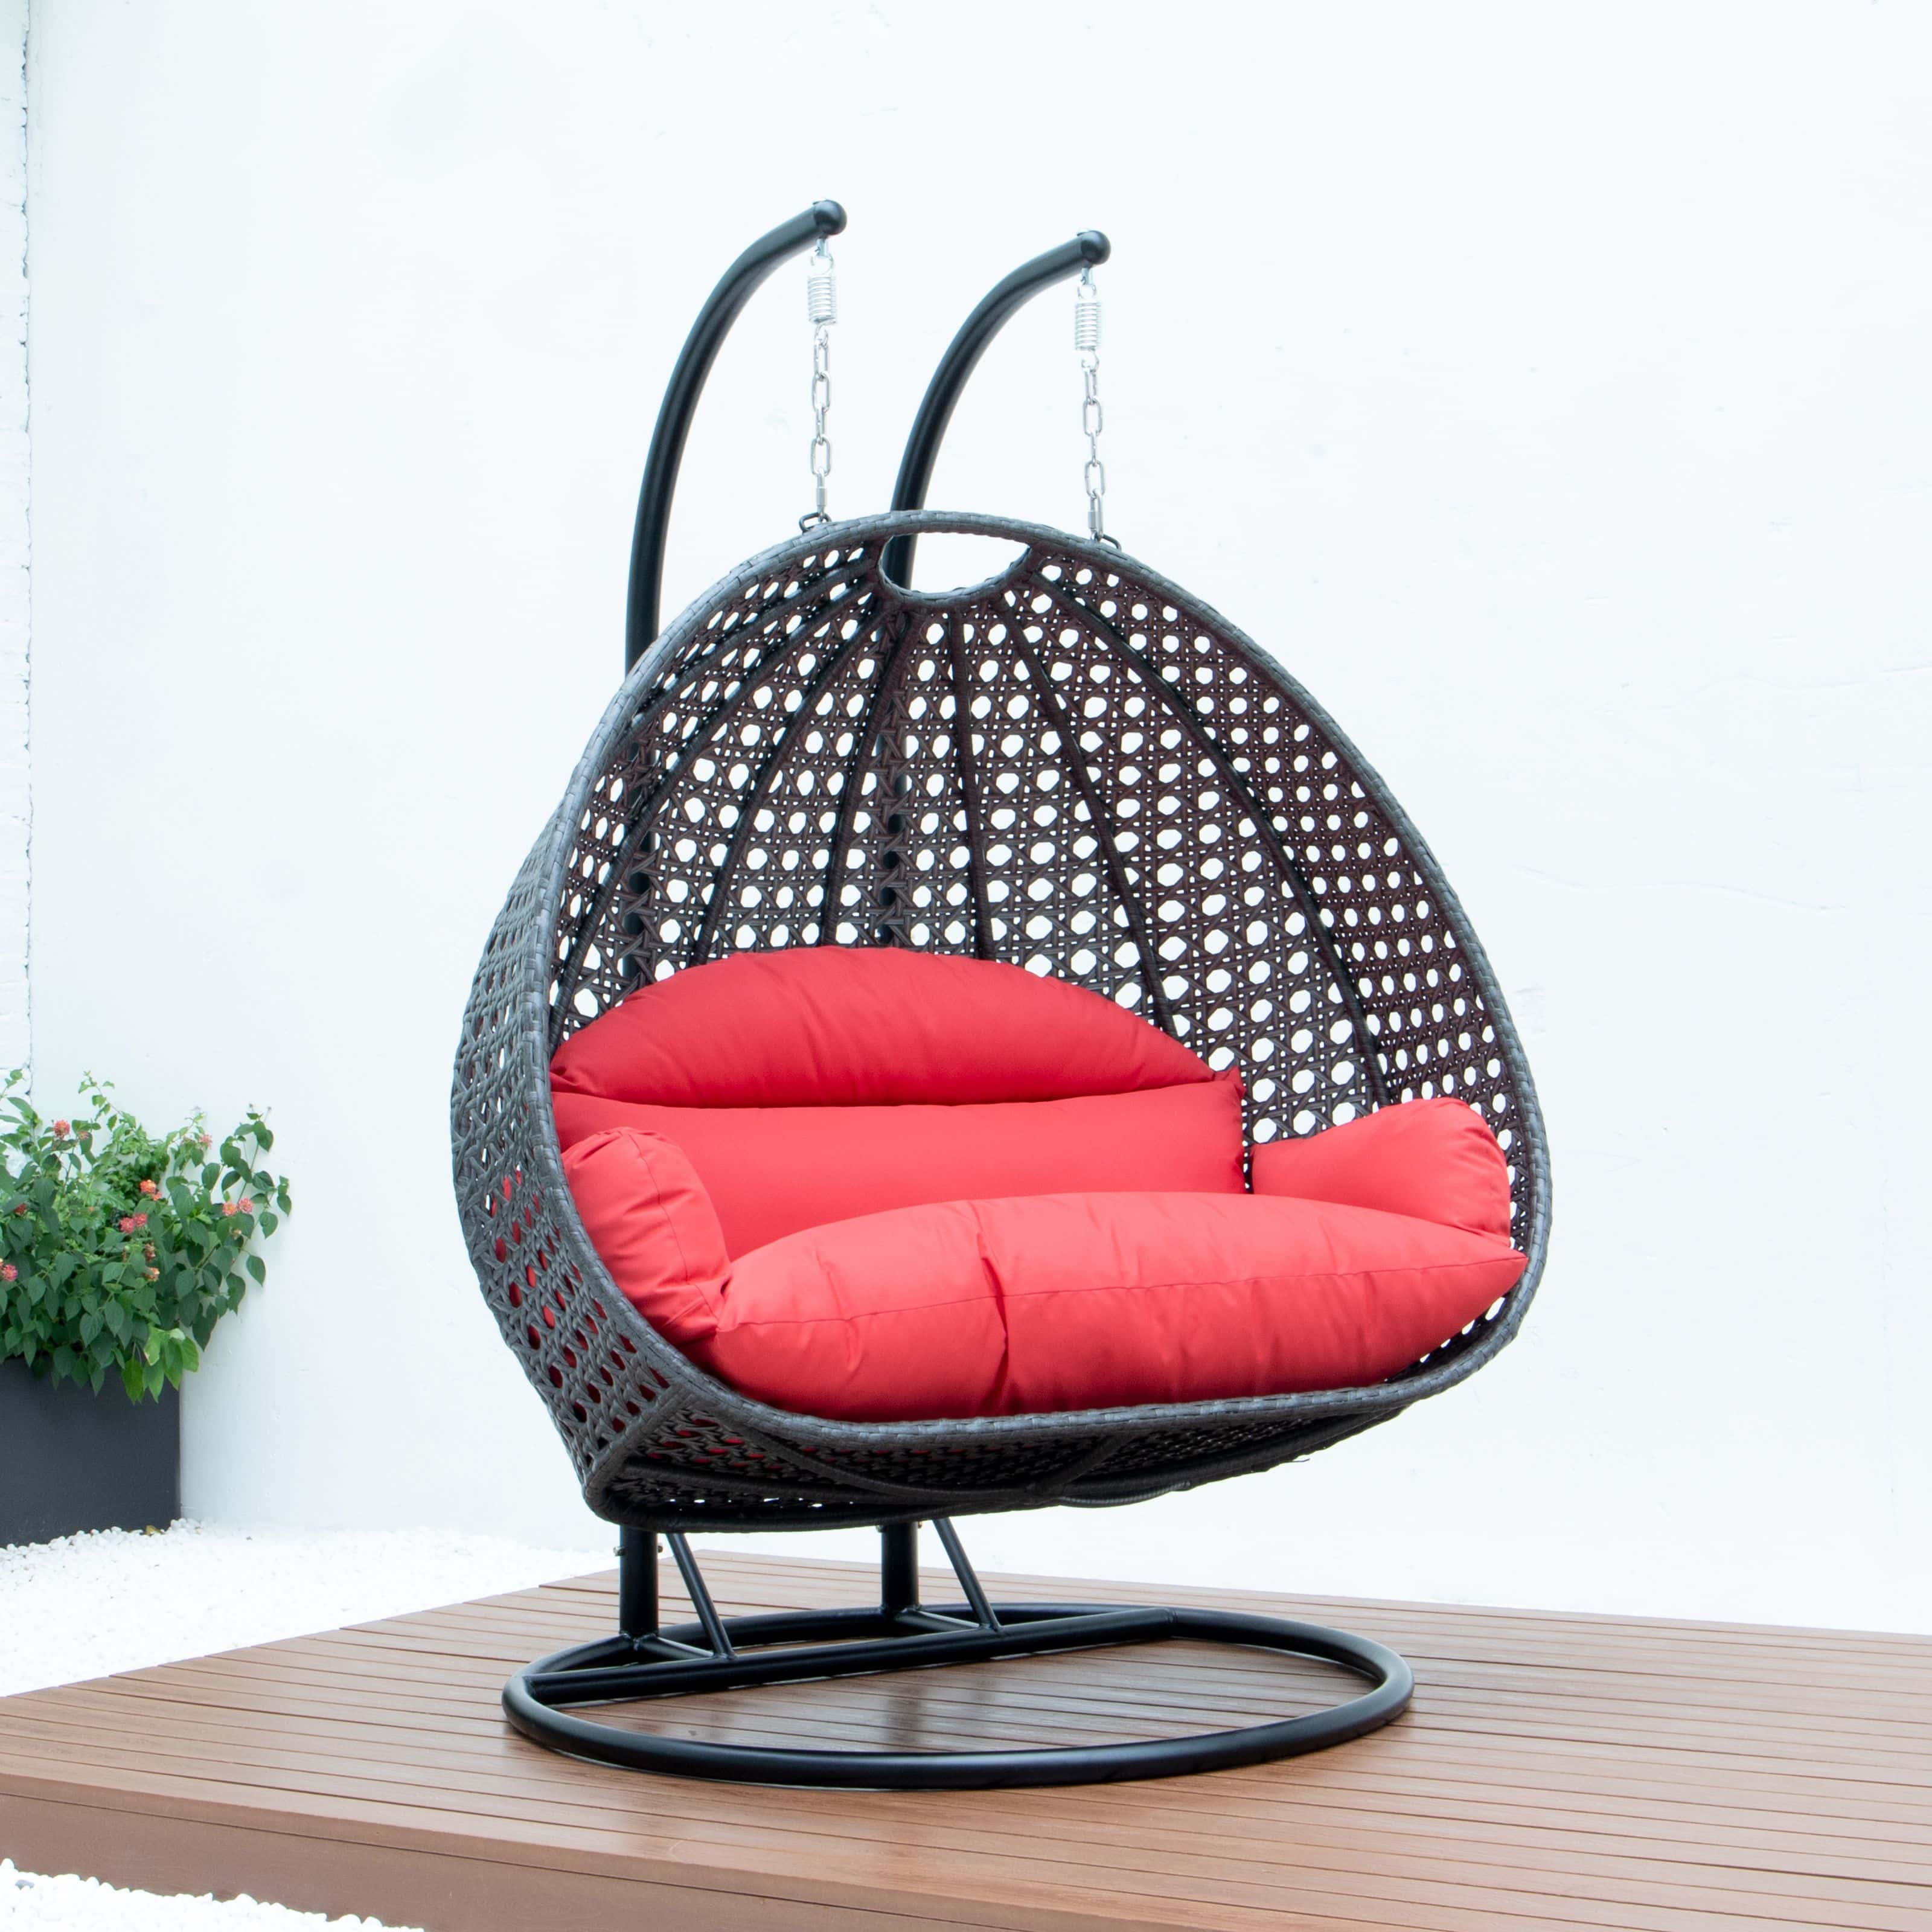 Wicker Hanging Egg Swing Chair - Double Seater - Charcoal w/Red Seat by